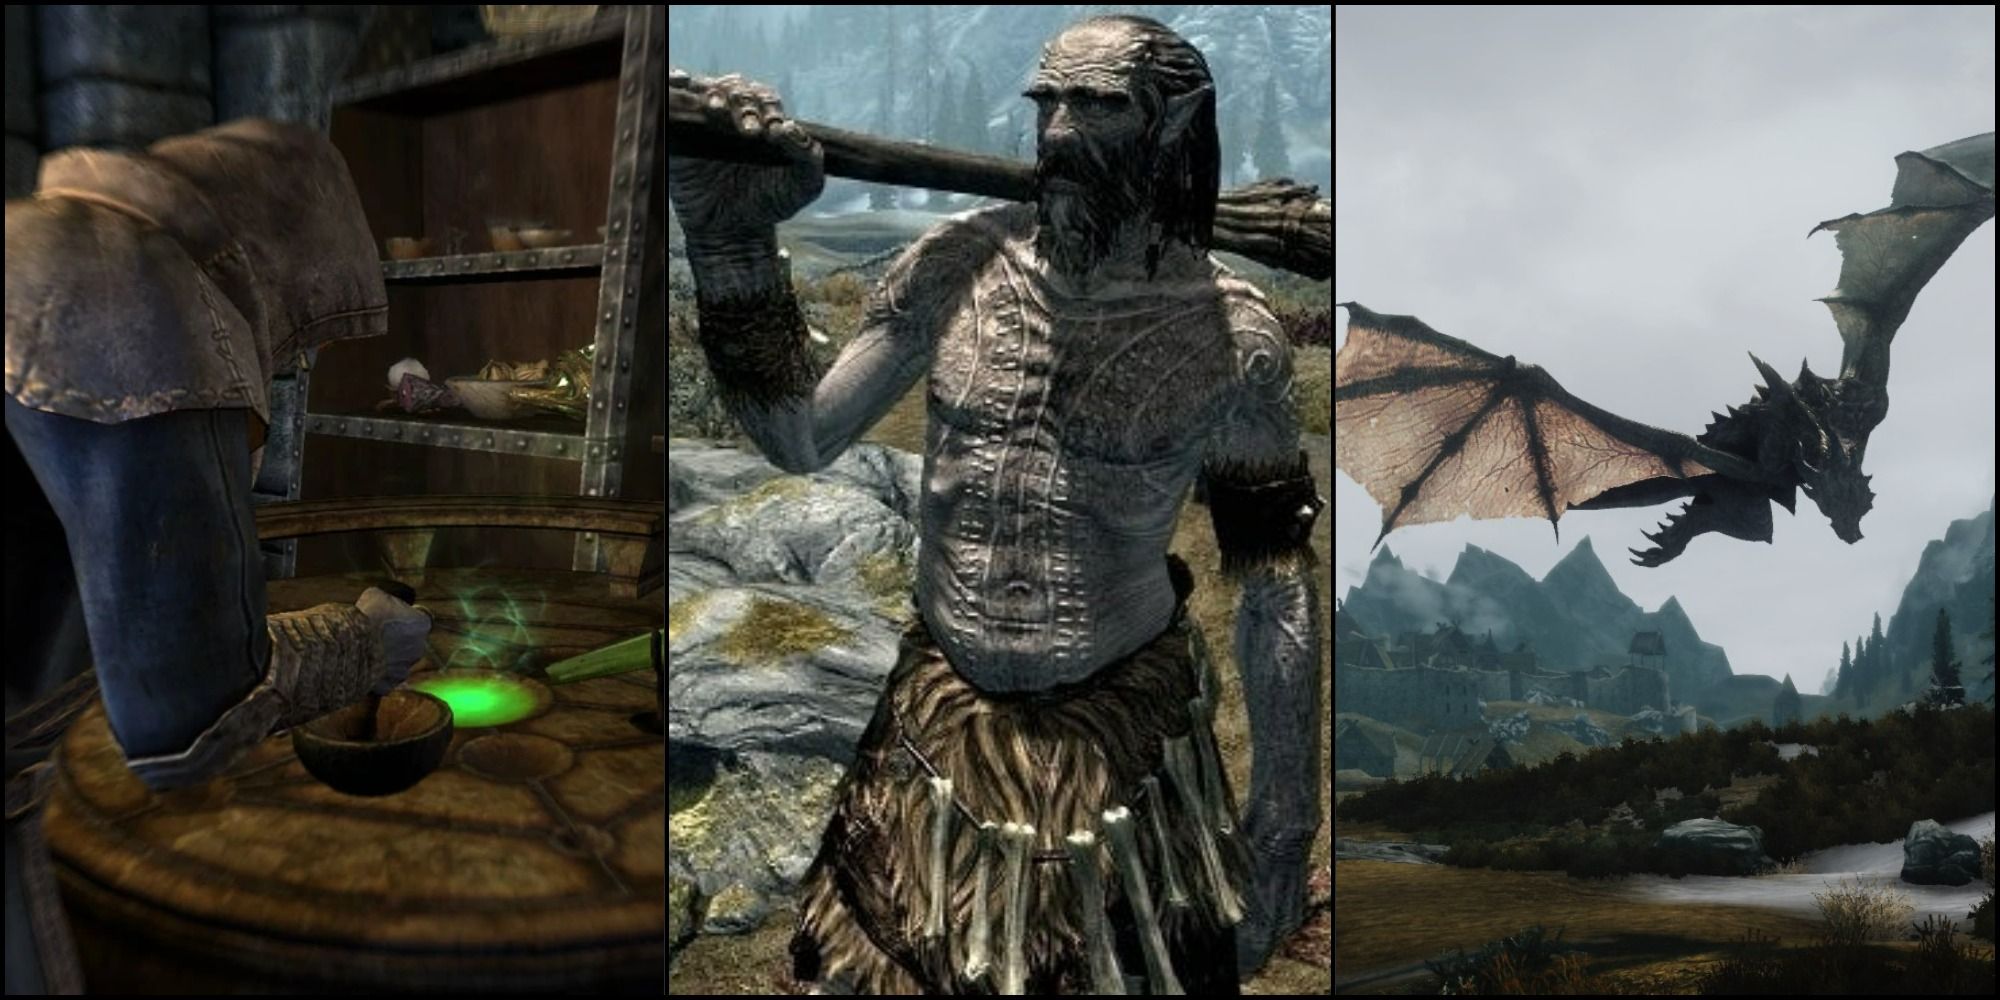 A split image for Skyrim featuring a player at an alchemy table to the left, a giant in the middle and a dragon to the right